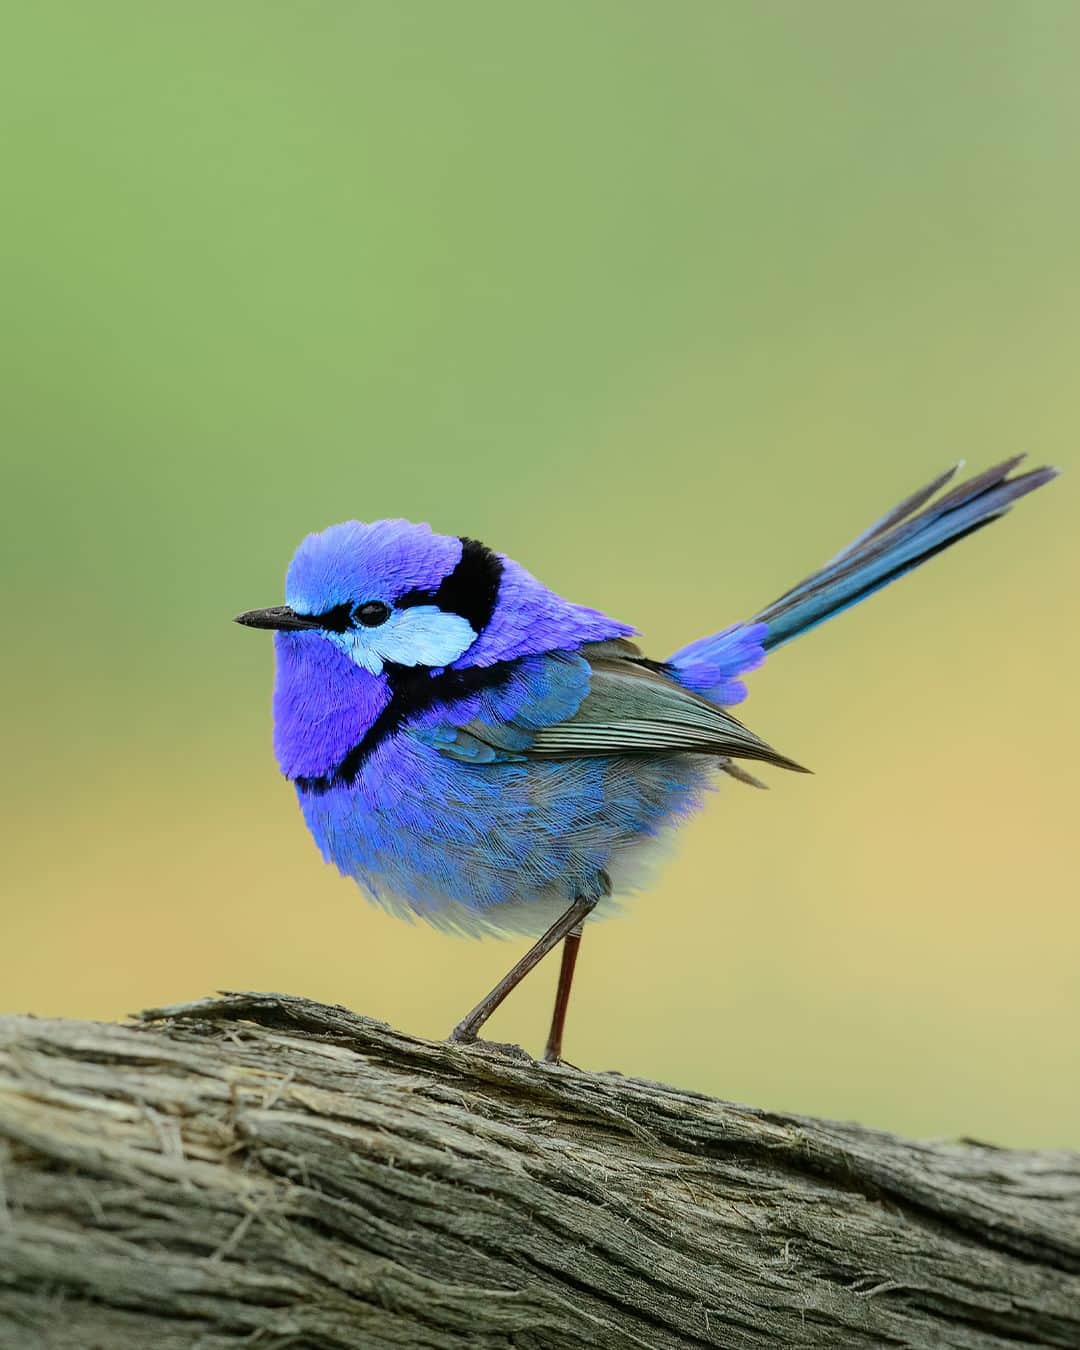 Nikon Australiaのインスタグラム：「Luck can side with you when you least expect it, and for @ravi_arora, this little Splendid Fairywren was certainly waiting for the right moment.   "I remember being in India for personal commitments when fairy season (spring) was on and I wondered if I will ever be able to see these guys in their true colours. I managed to come back just in time and tried my luck visiting Hattah to see these beauties and I guess I was blessed for my efforts.  I observed the pair of fairywrens from dawn to dusk raising the young one and taking parenting turns, I moved as little as possible for a couple of hours and let them get used to my presence. Once the light was good enough and as I got an idea of their movements, I anticipated a wooden log with a nice and clean background to create this shot.  One particular thing I wanted was to keep the whole bird sharp including the tail, I bumped the ISO during the day and set the f-stop at 8 and since the bird was just tip-toeing around me 1/1250 sec was enough to freeze."  Photo by @ravi_arora  f/8 | 1/1250 sec | ISO 2500  Captured on the D5 and AF-S NIKKOR 500mm f/5.6E PF ED VR  #Nikon #NikonAustralia #MyNikonLife #NIKKOR #NikonD5 #D5 #BirdPhotography #WildlifePhotography #Australia」